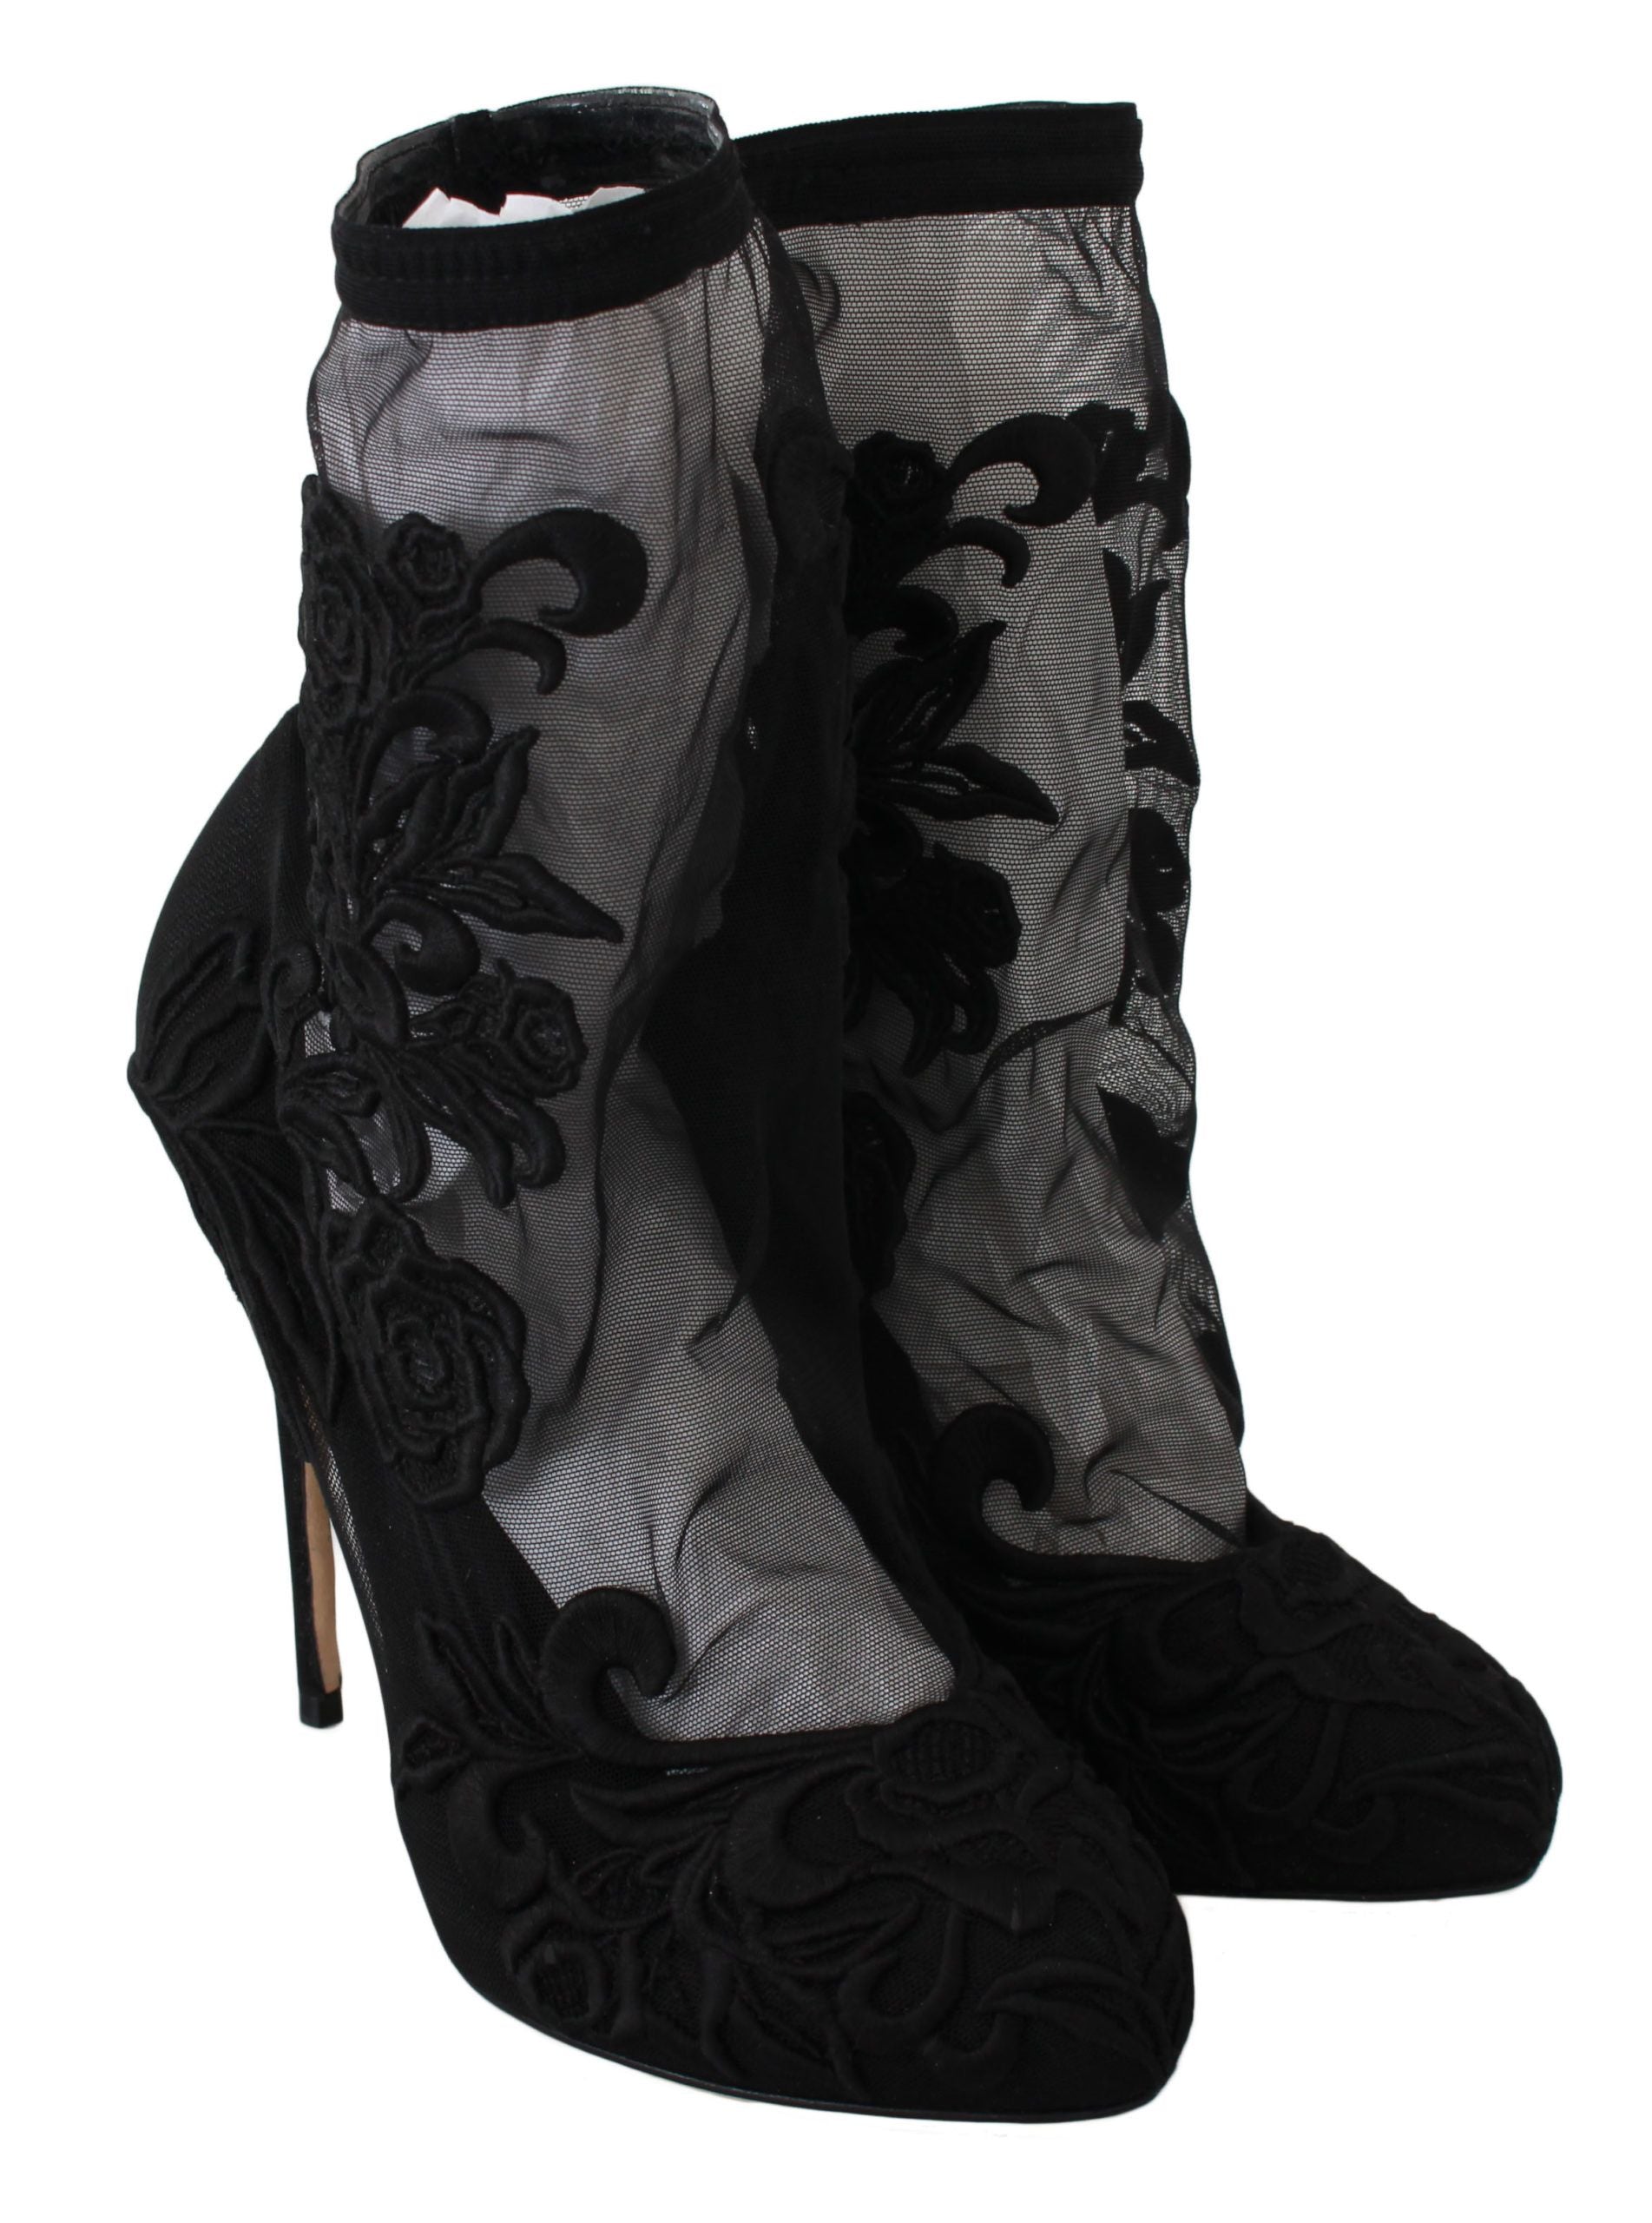 Embroidered Floral Stiletto Socks Booties